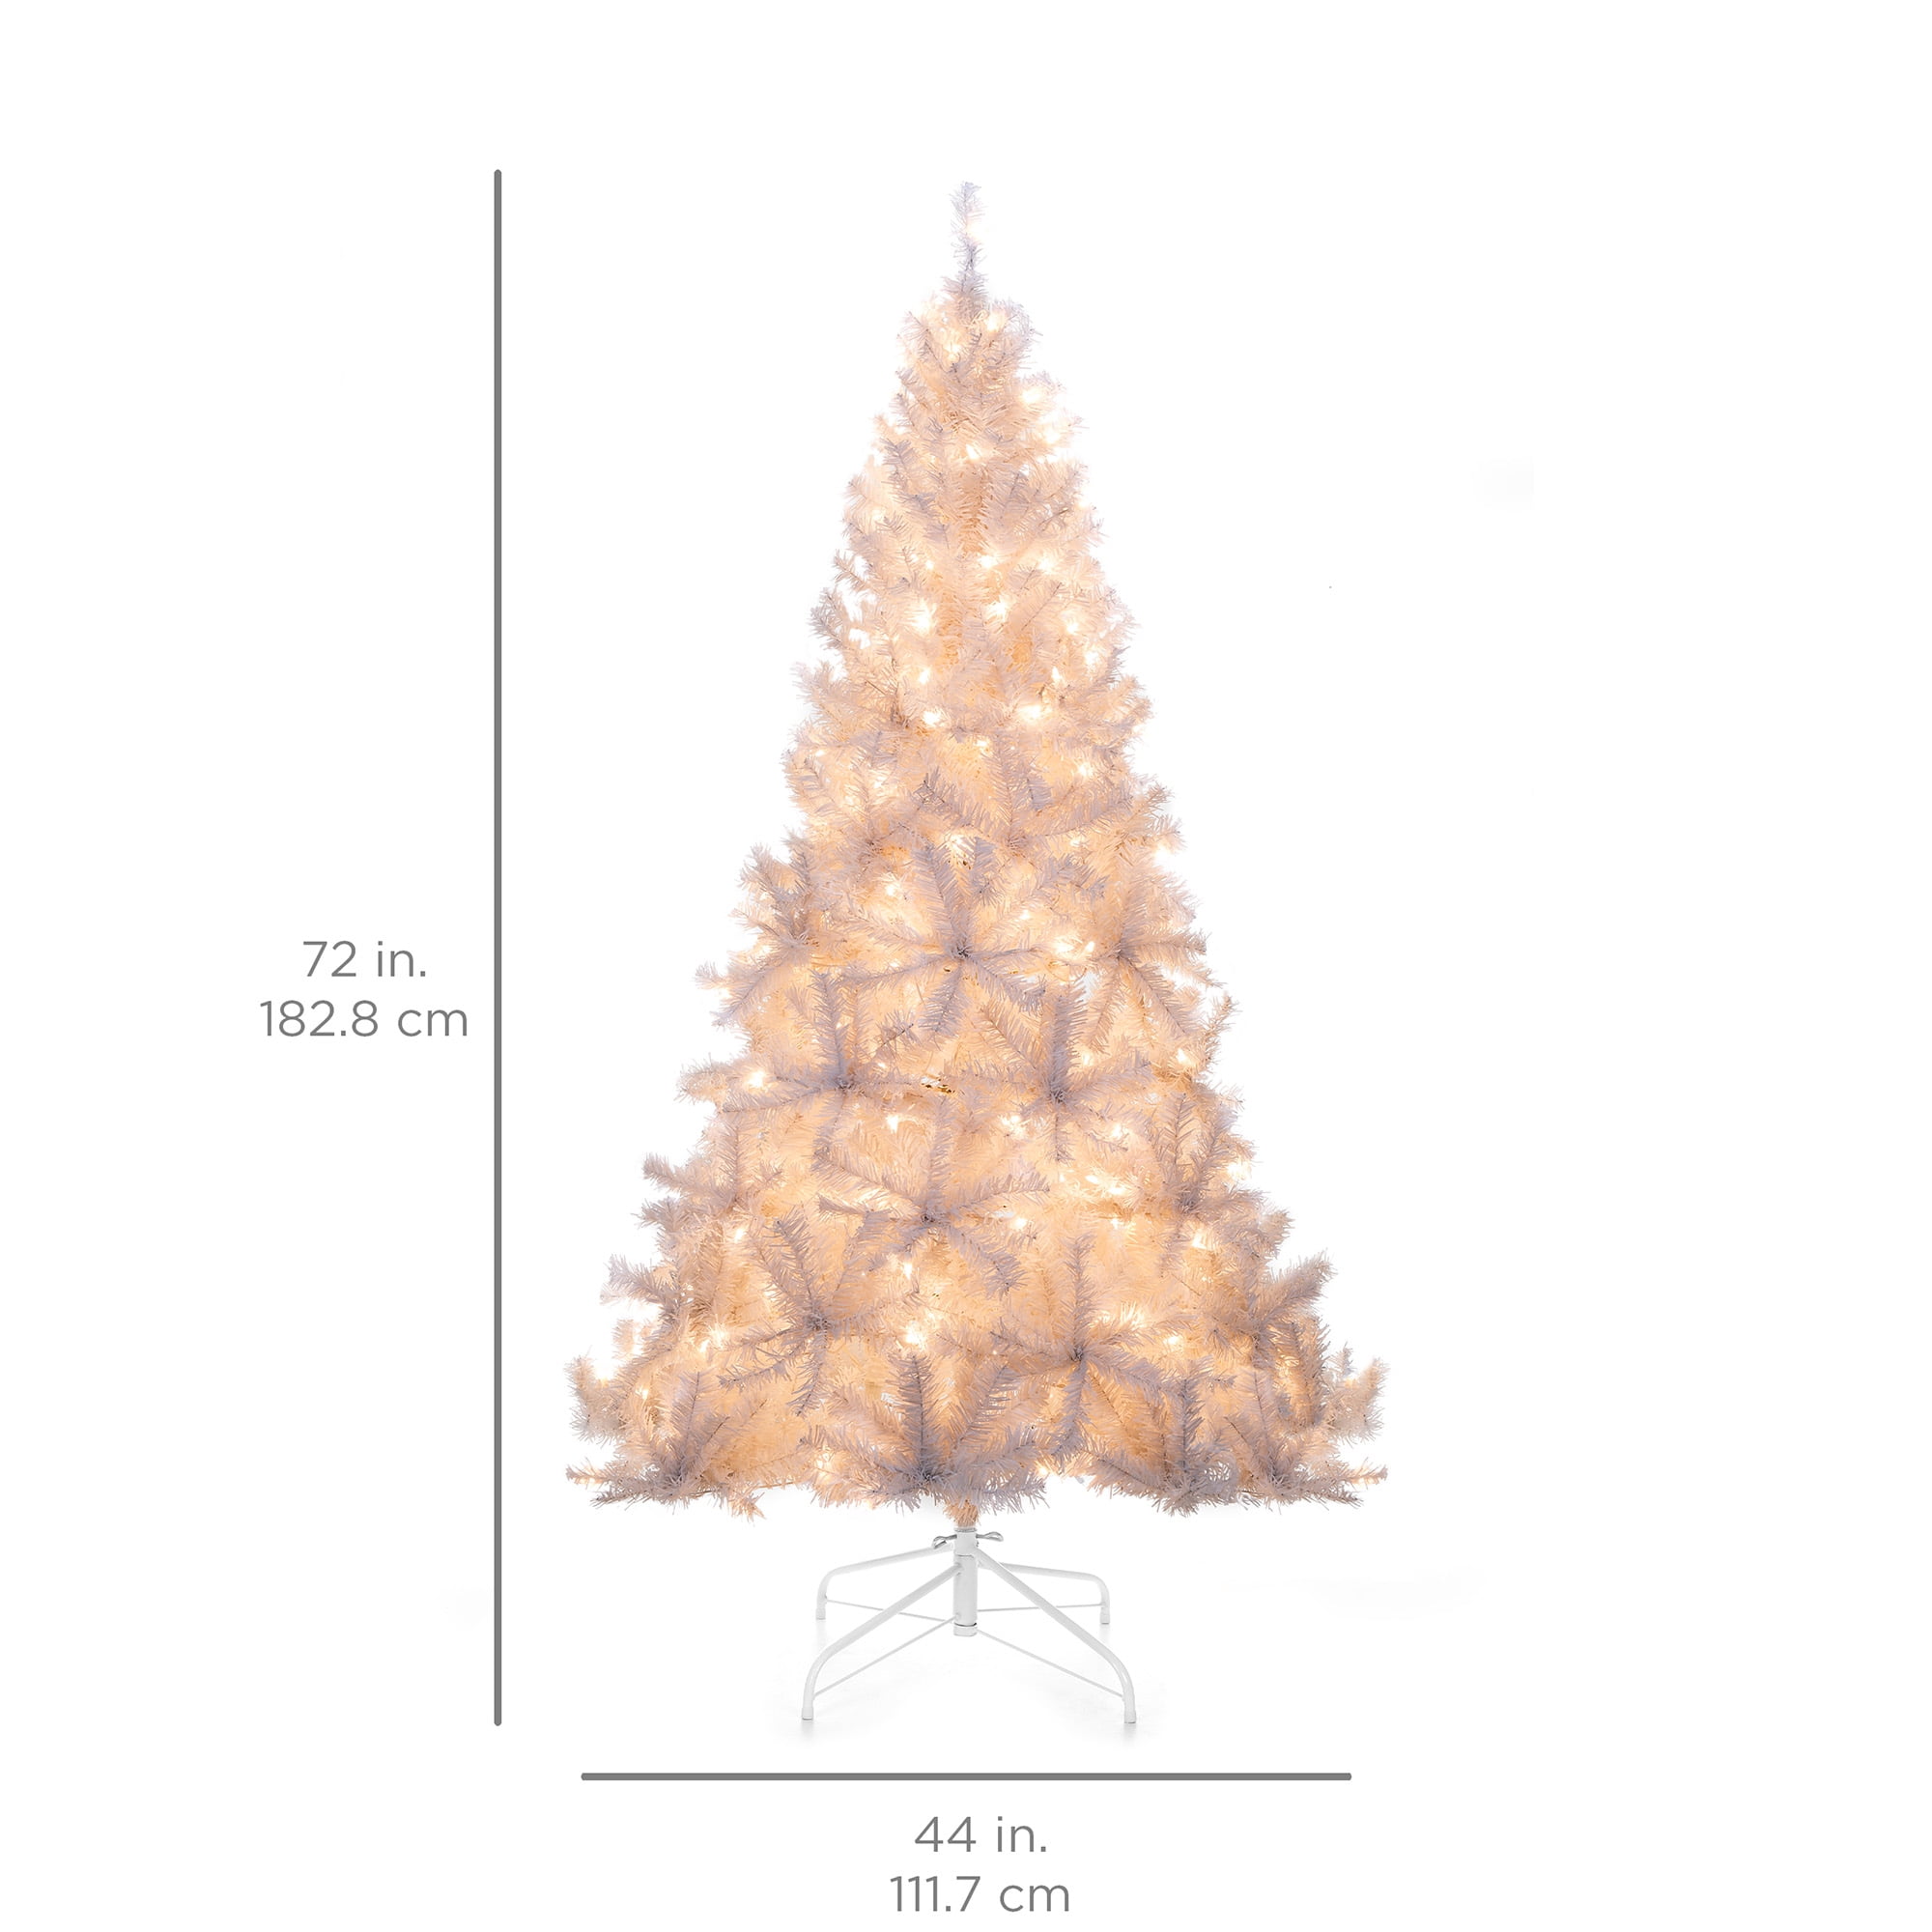 6Ft Pre-Lit PVC Hinged Artificial Christmas Tree w/ 250 Lights & Stand Decor